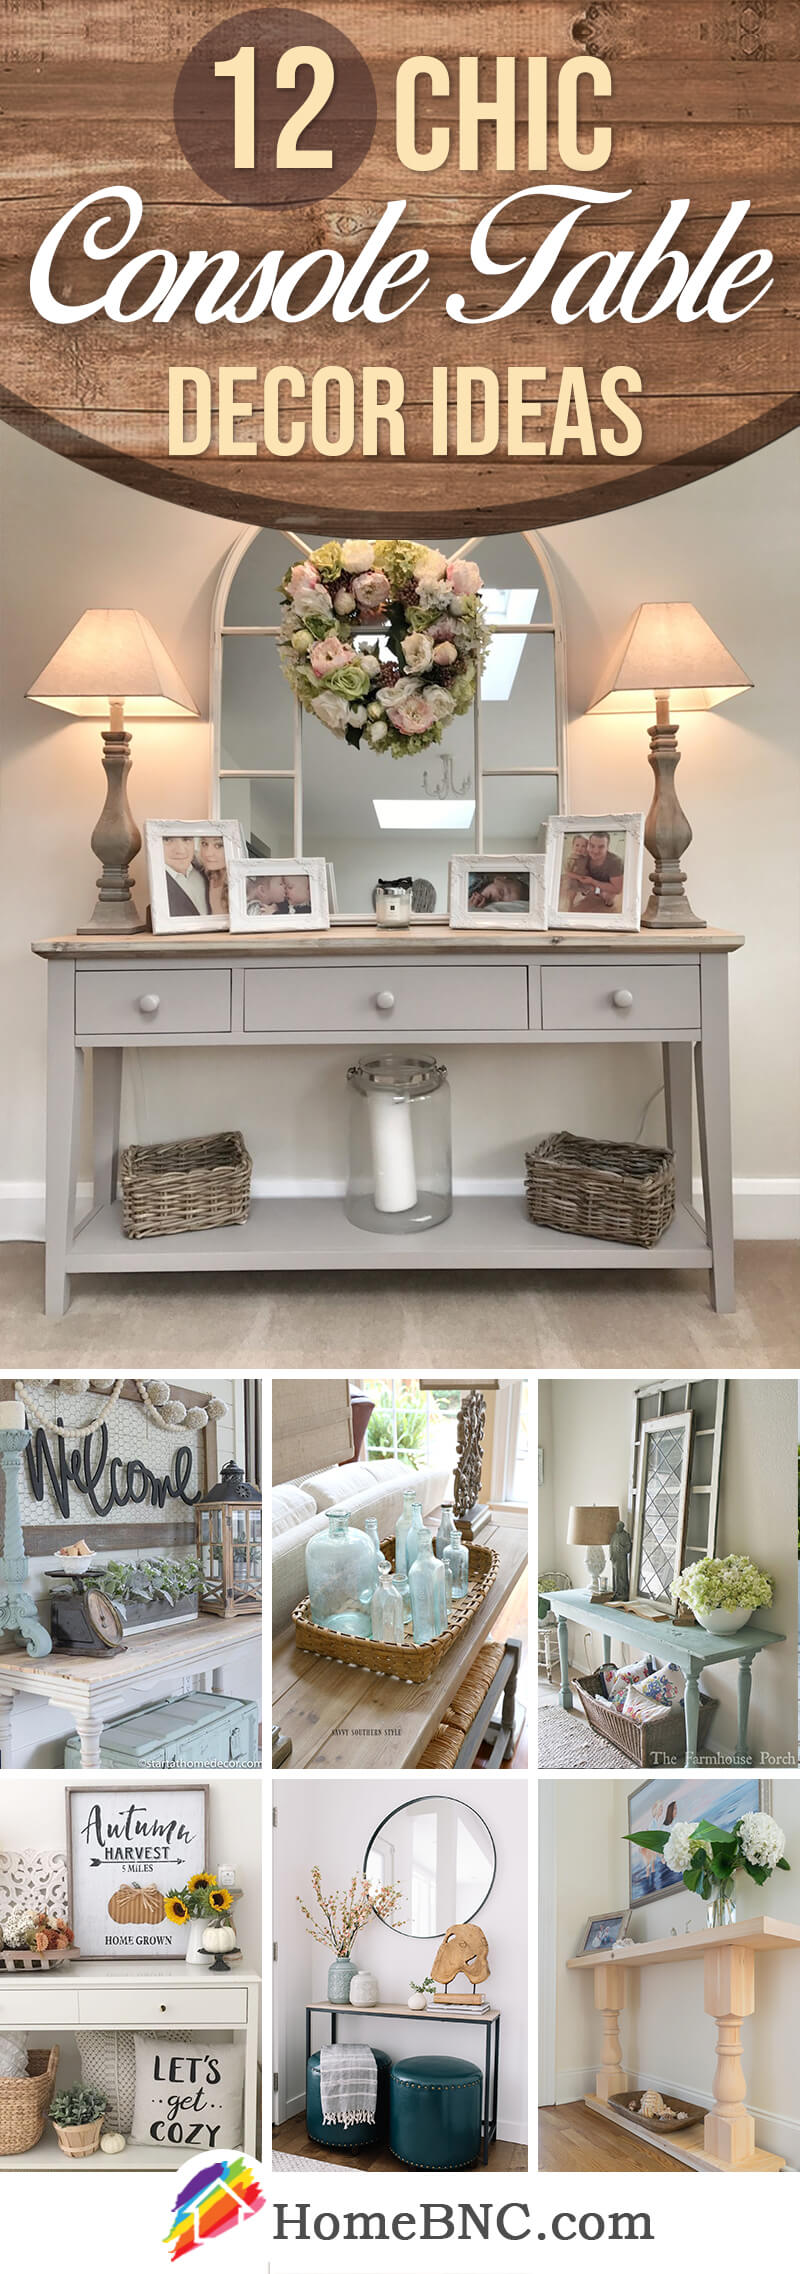 12 Best Console Table Decorating Ideas And Designs For 2021 - Accent Table Decor Ideas